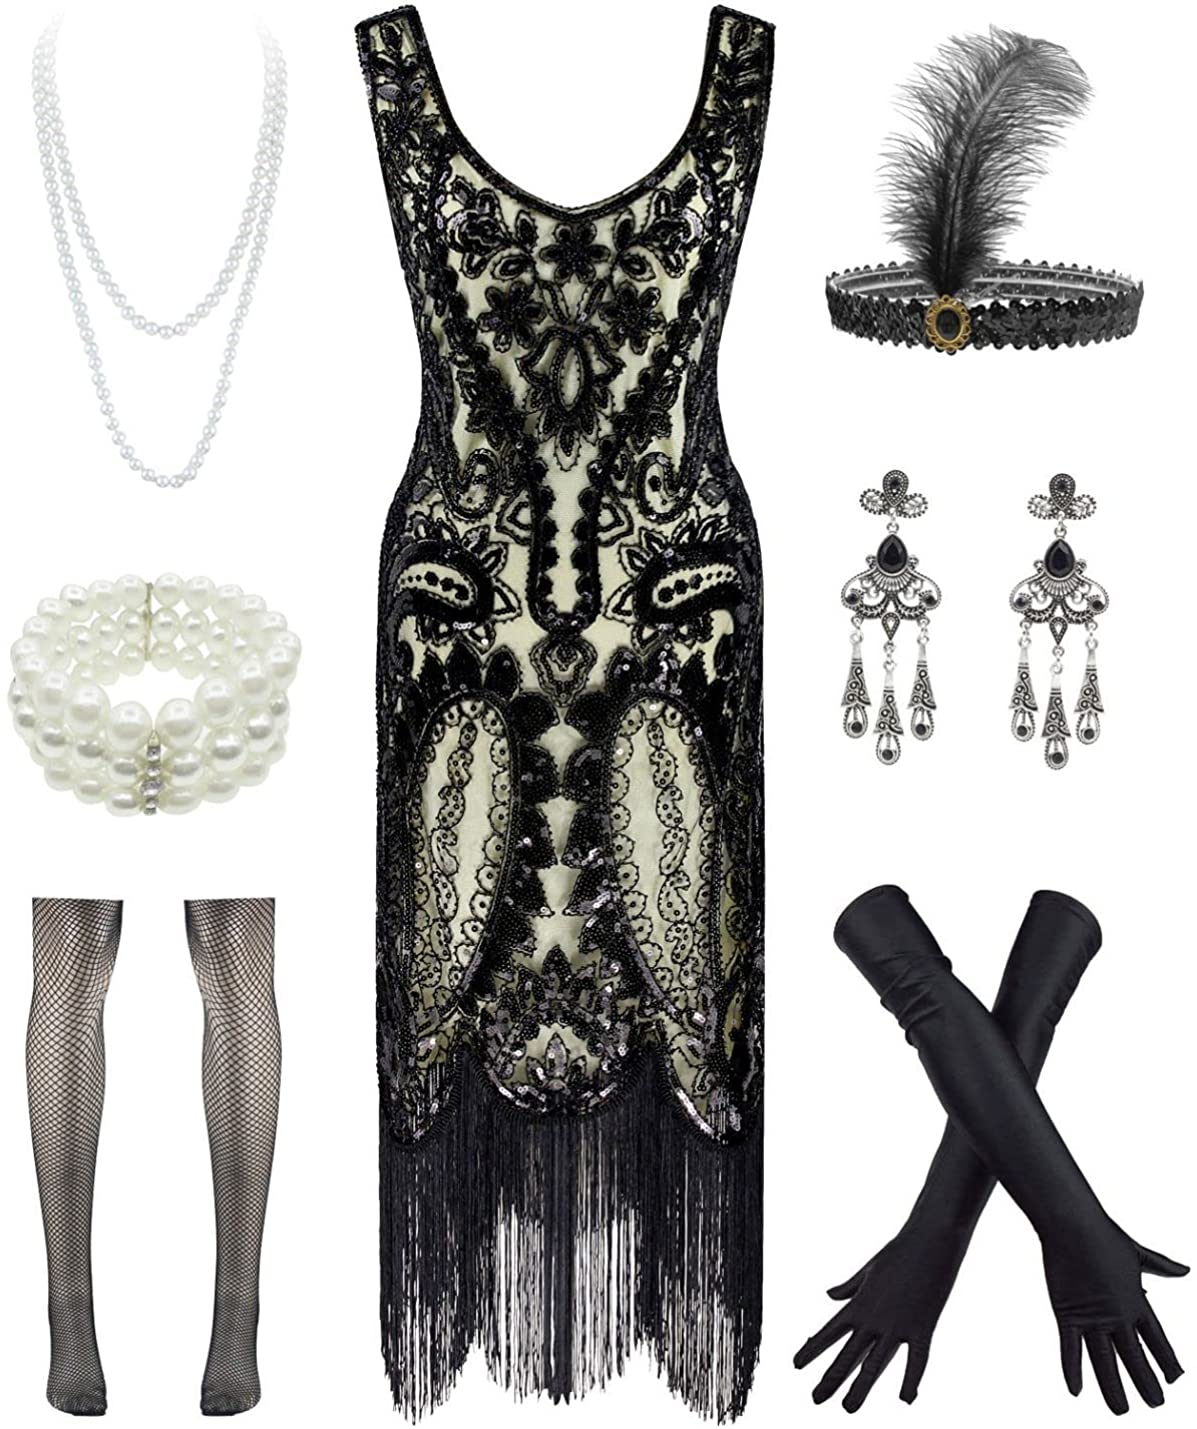 Womens Vintage Lace Fringed Gatsby 1920s Cocktail Dress with 20s Accessories Set 